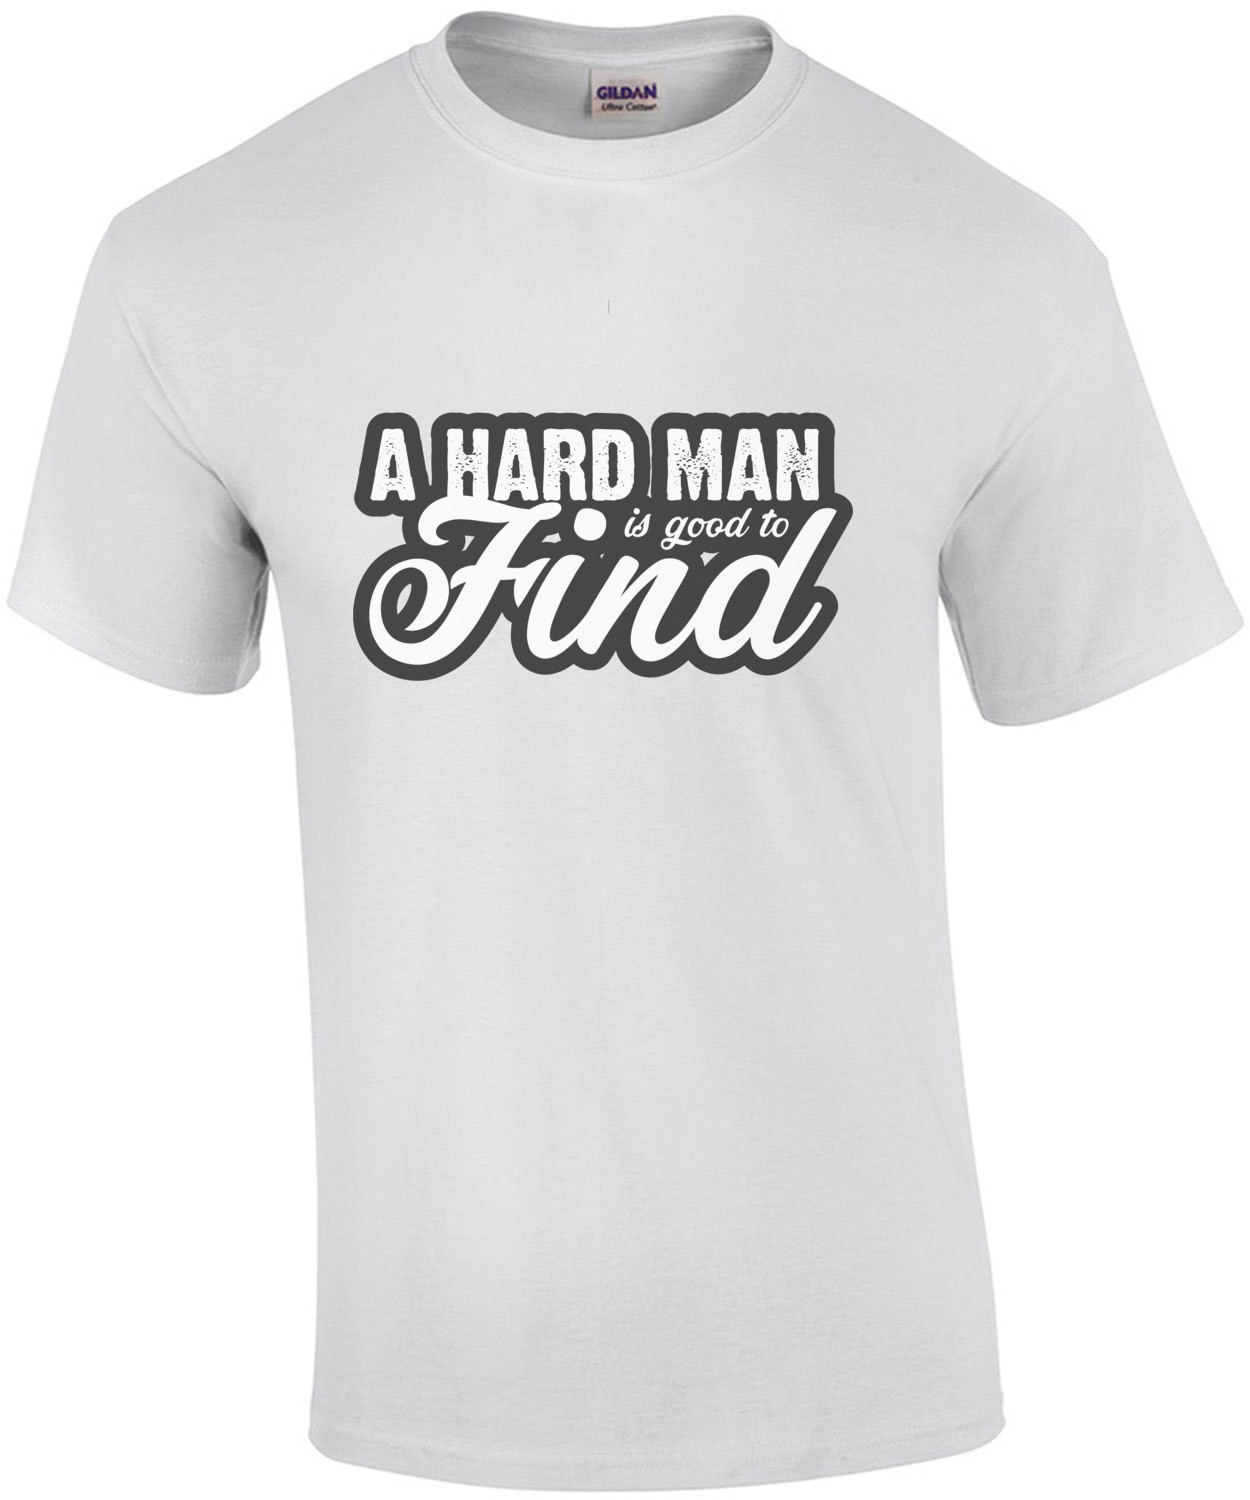 A hard man is good to find - Funny T-Shirt